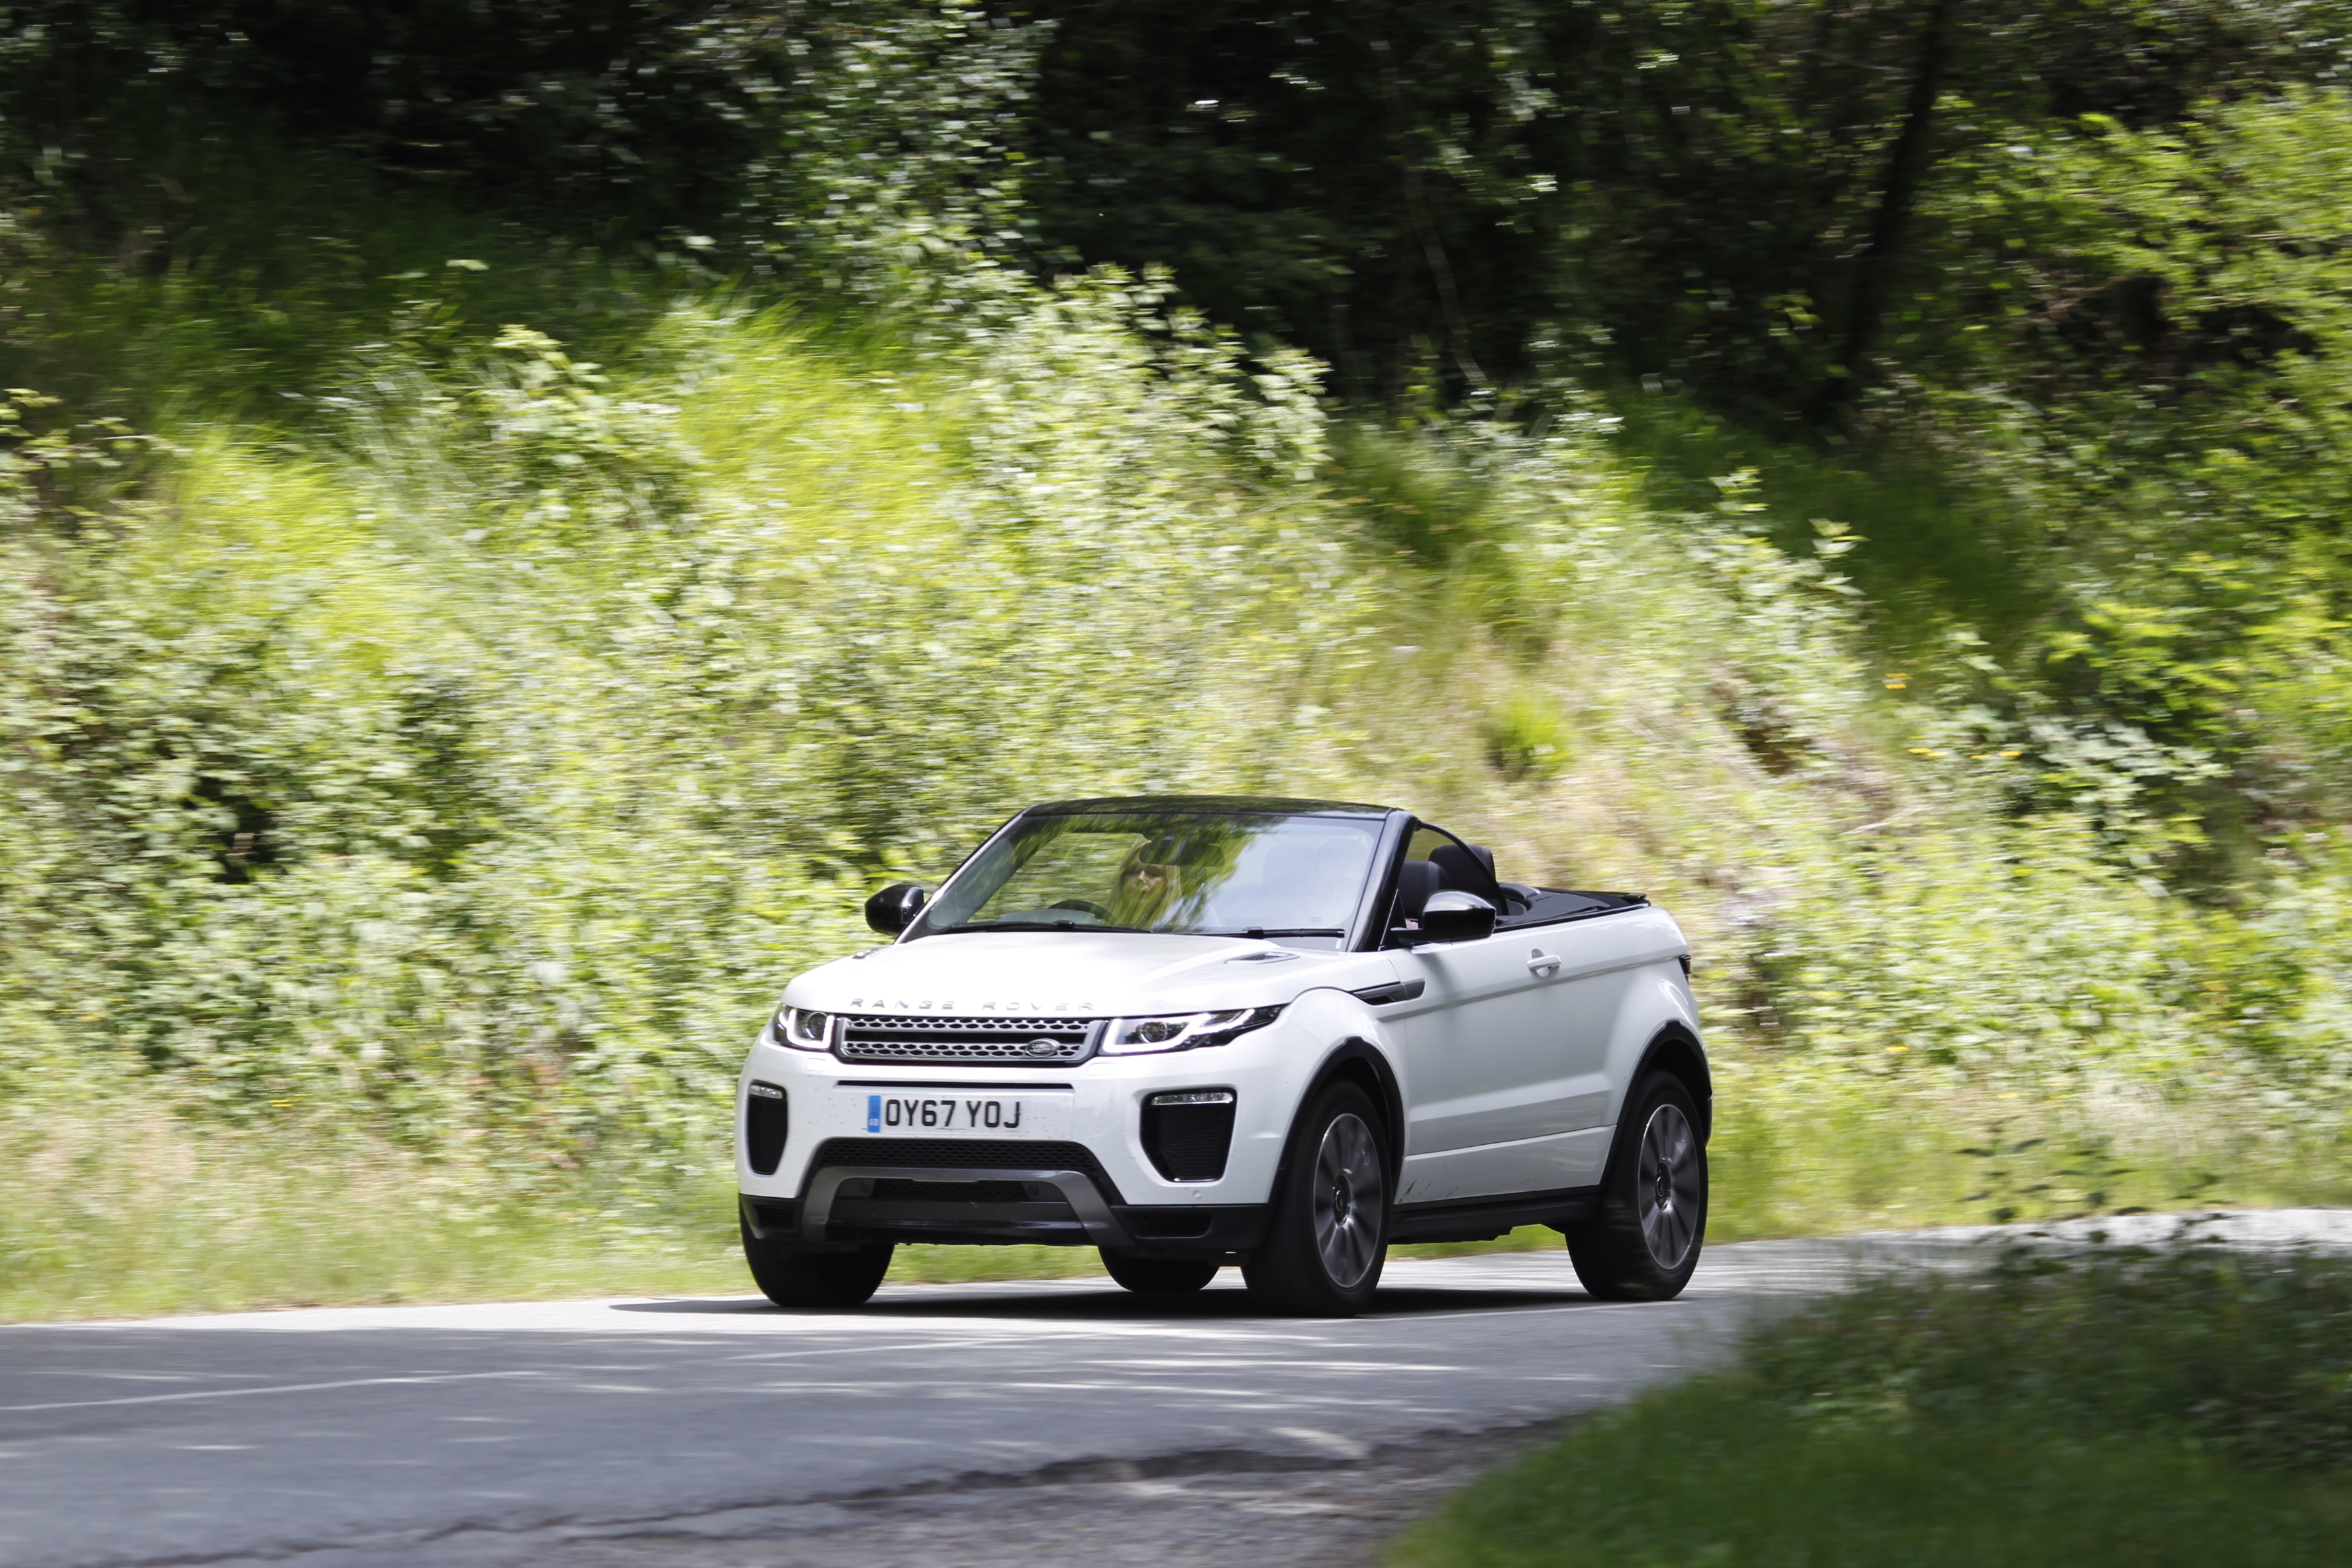 The Summer Road Trip: Bordeaux to Toulose in the New Range Rover Evoque